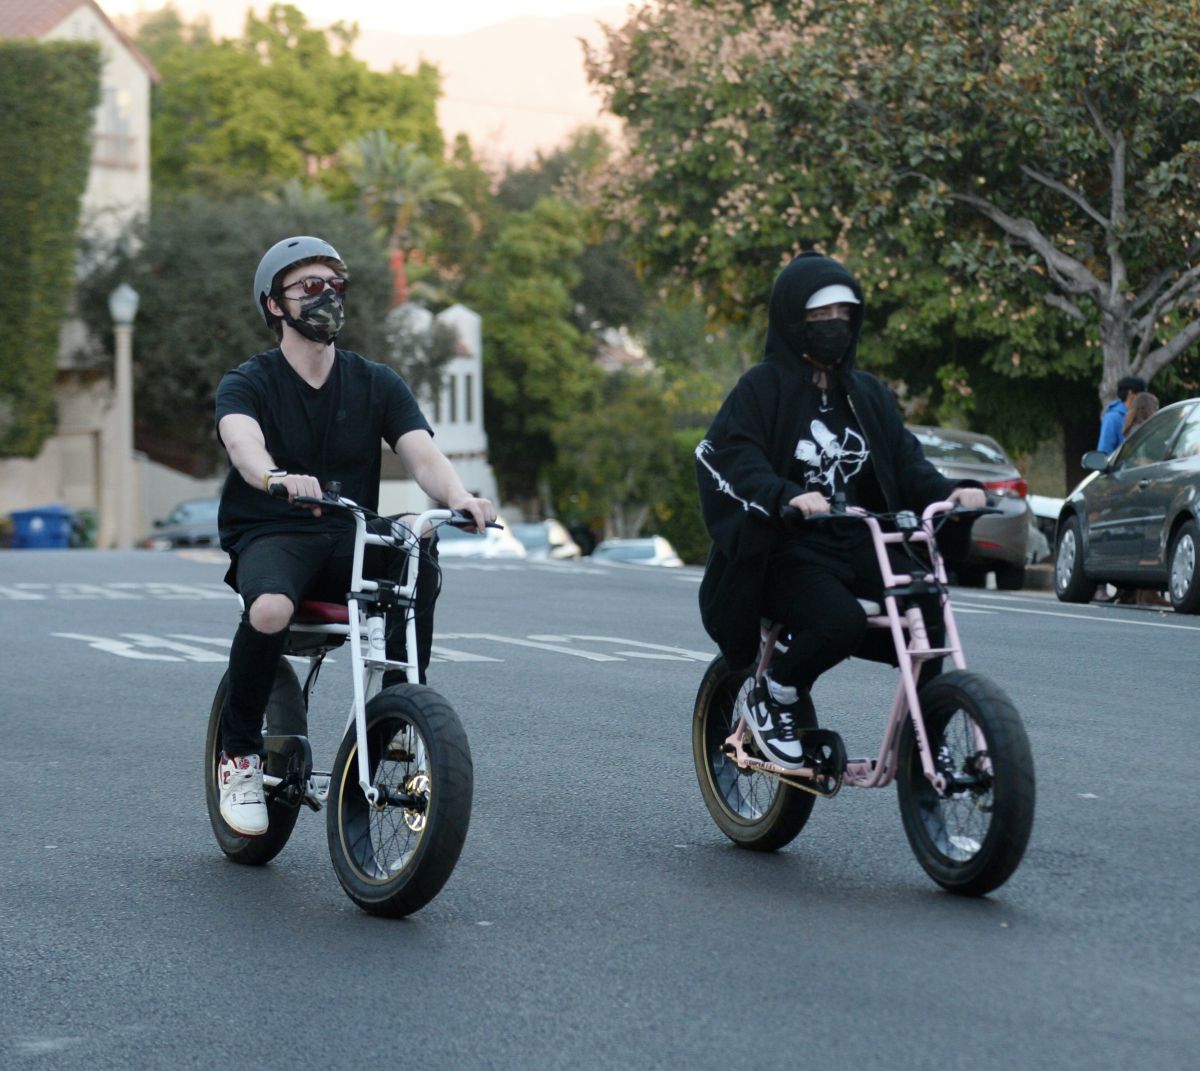 billie-eilish-and-finneas-o-connell-out-riding-bikes-in-los-angeles-12-21-2020-4.jpg